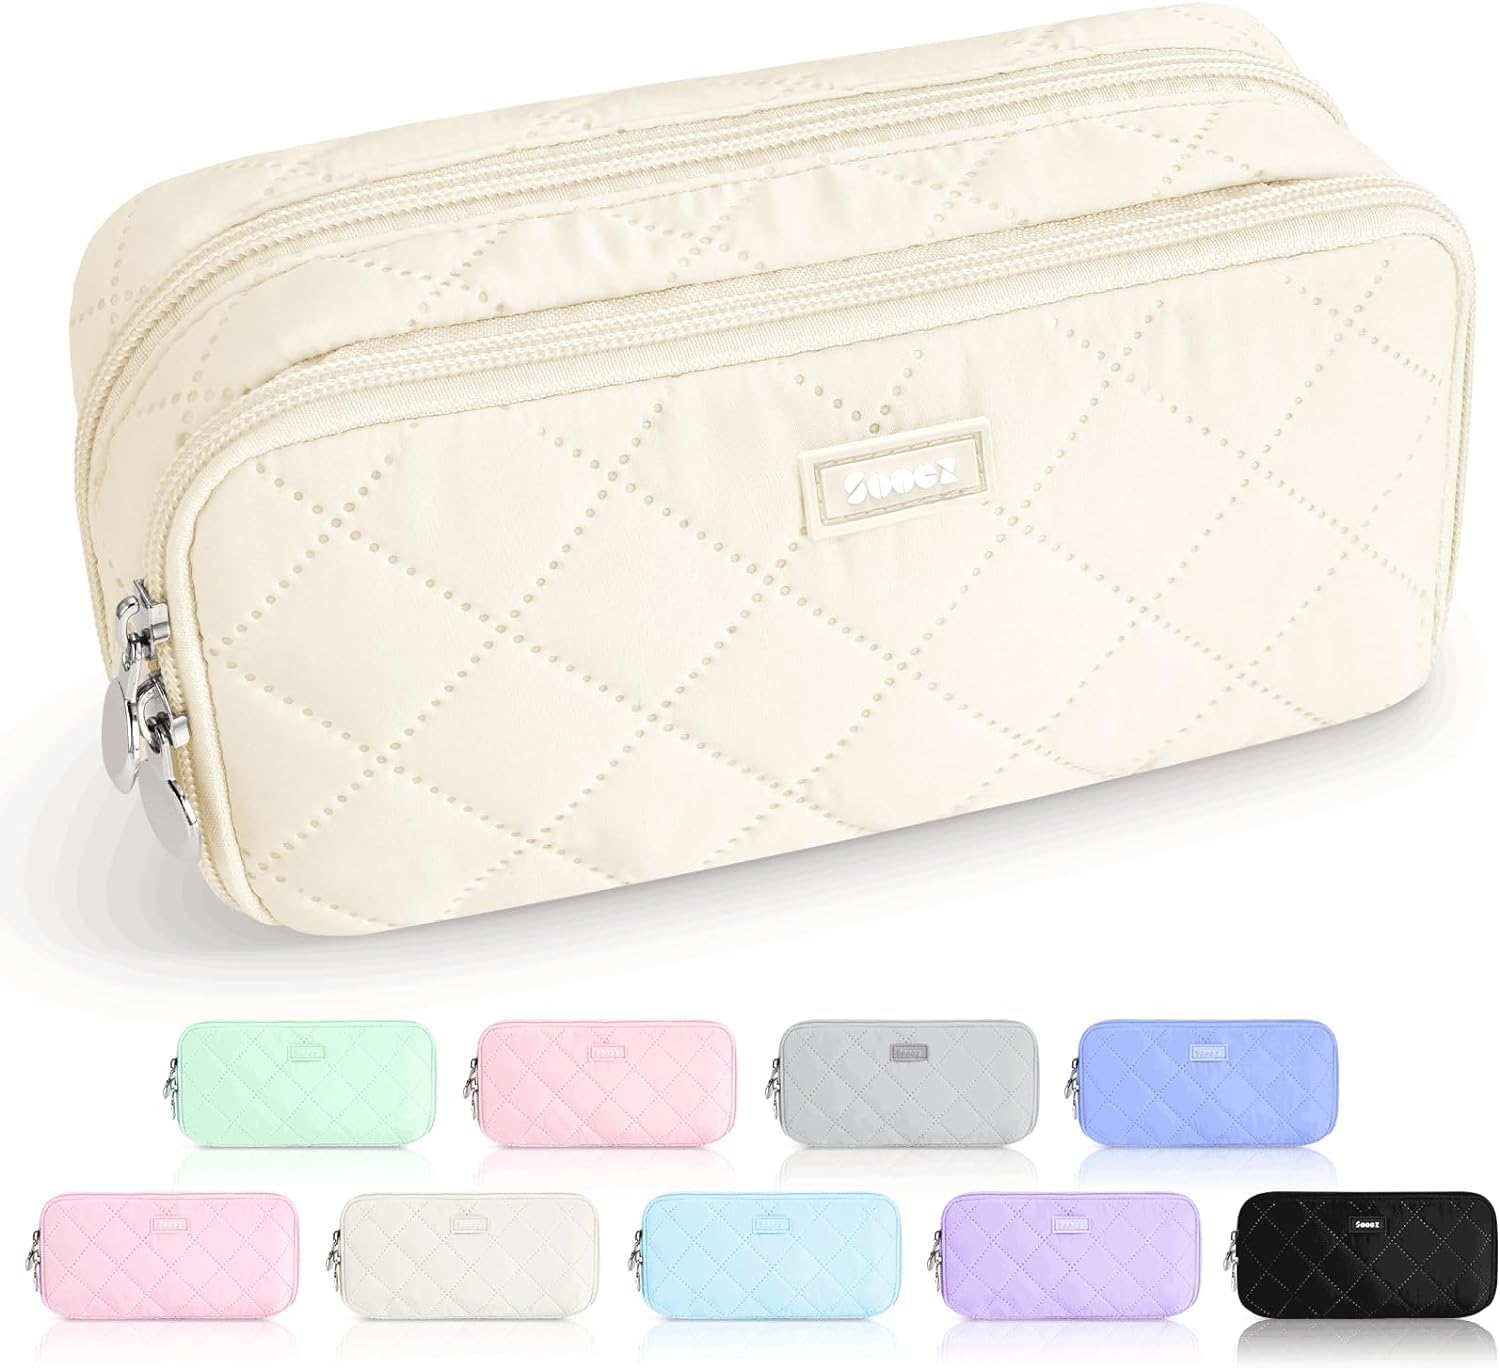 Sooez Large Pencil Case Pouch,Extra Big Pencil Bag with 8 Compartments,Pen Bag Wide Opening,Soft Quilted Pencil Pouch Organizer with Zipper,Portable Pencil Case for Teen Girls,Beige